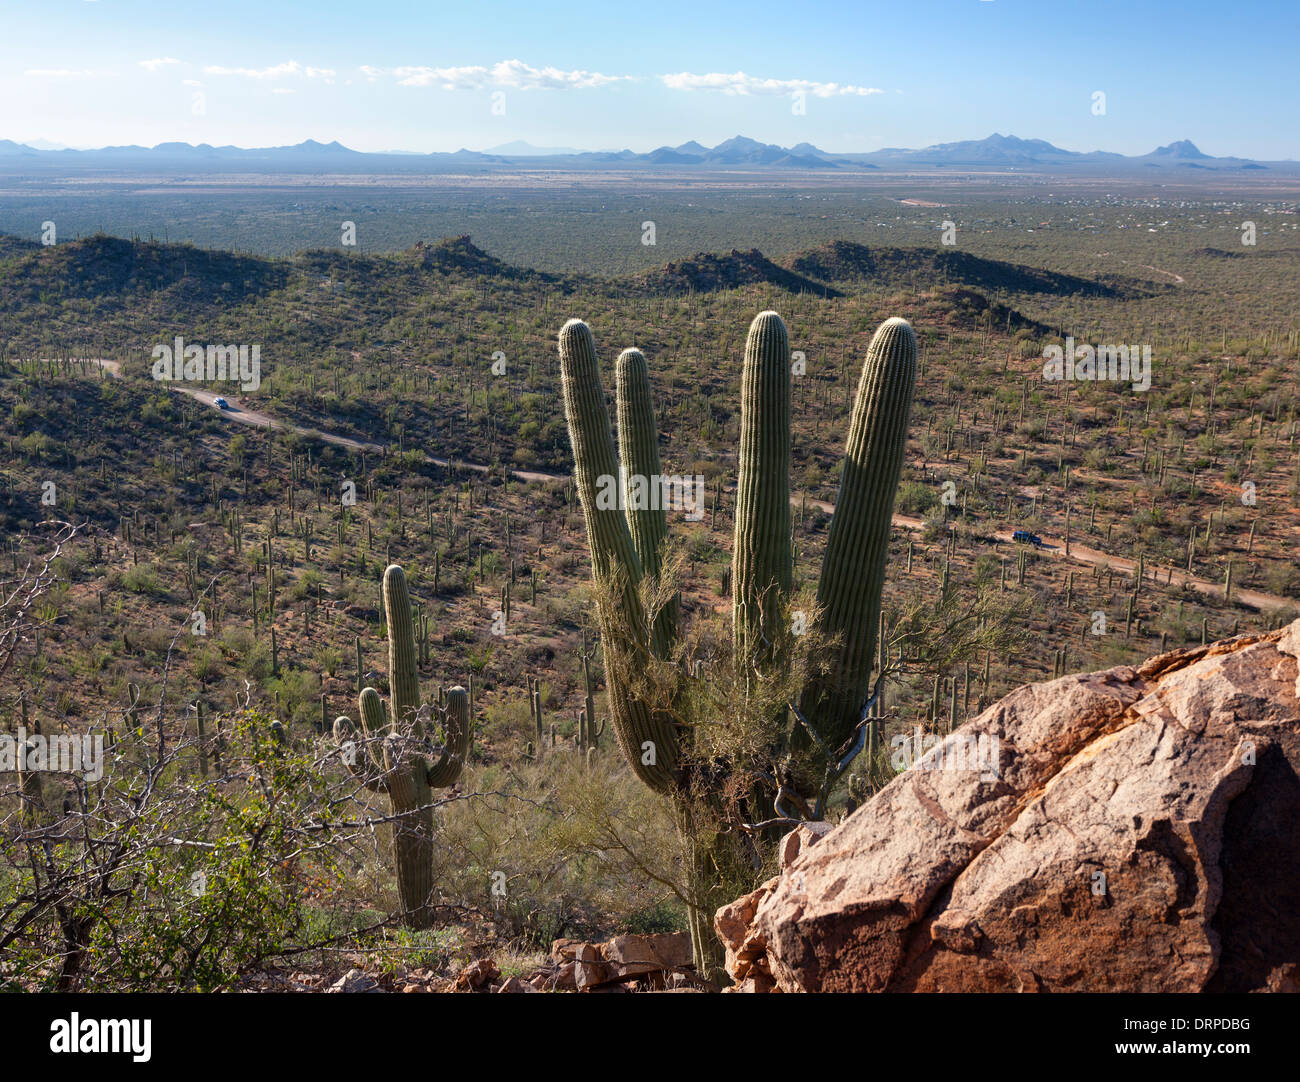 A view of Saguaro West National Park in Tucson Arizona from atop a hill. Stock Photo